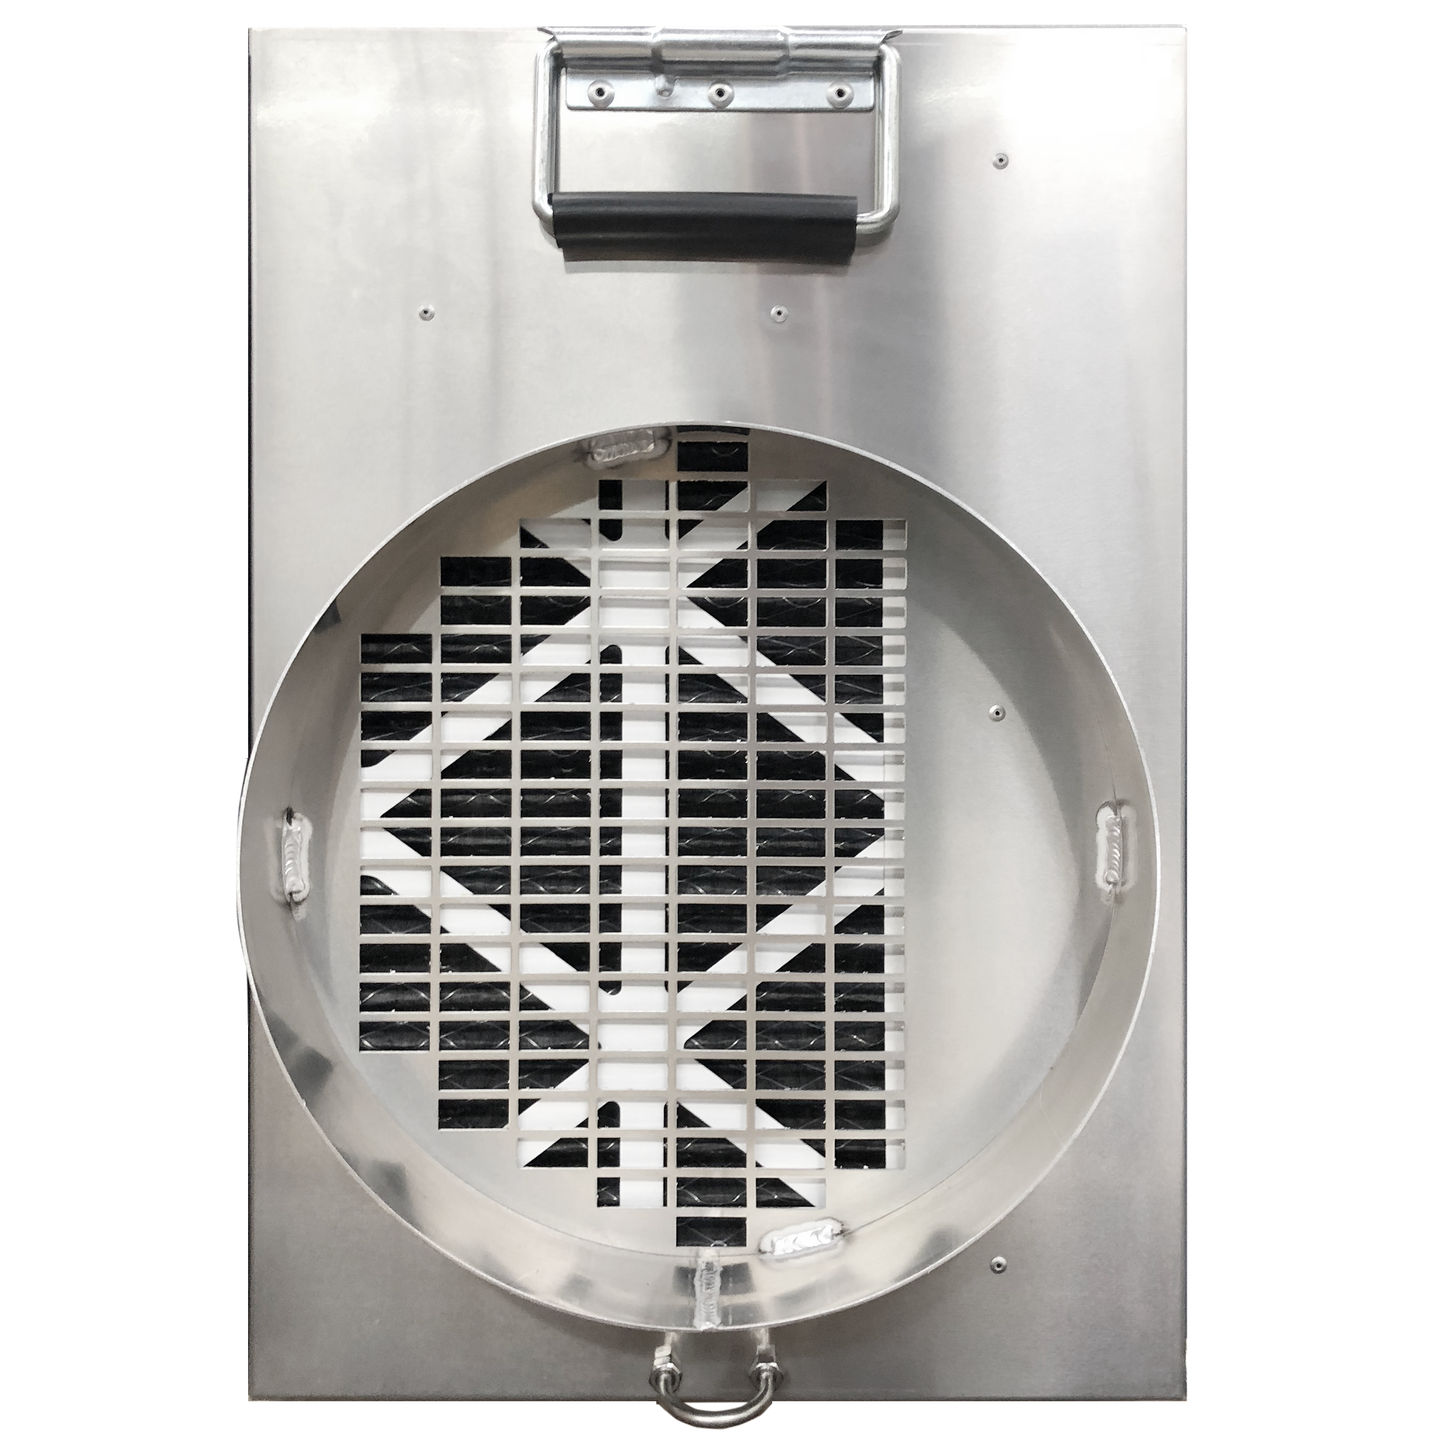 AgriAir Surface and Air Cleaner • Two PHI Generators 14" and 9" • #AA1000-3